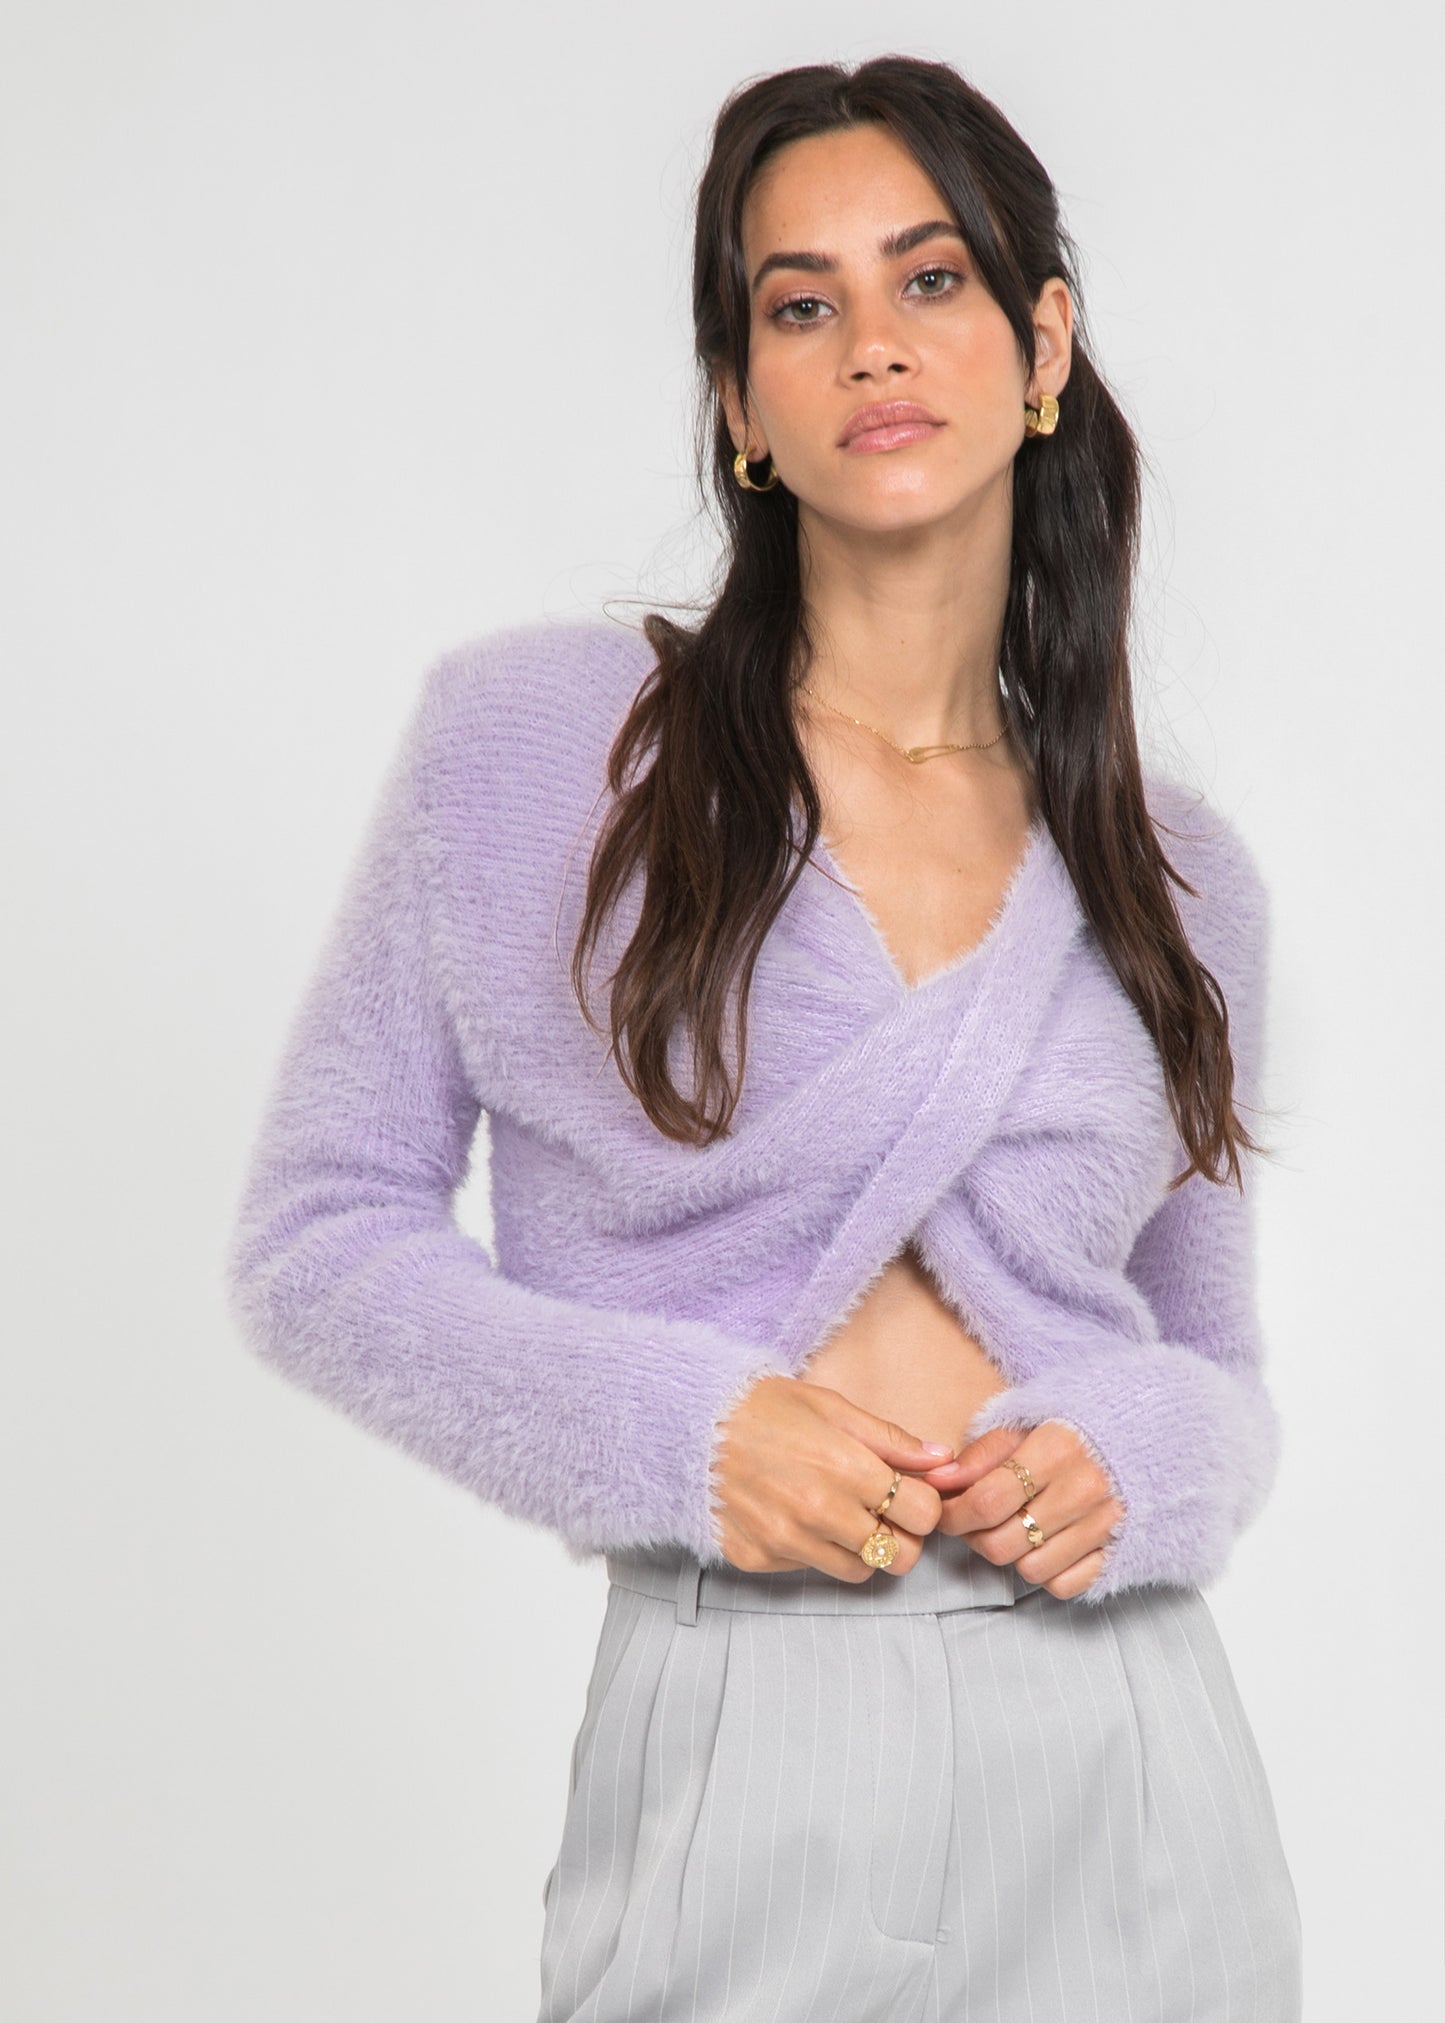 Fluffy drape front jumper in lilac